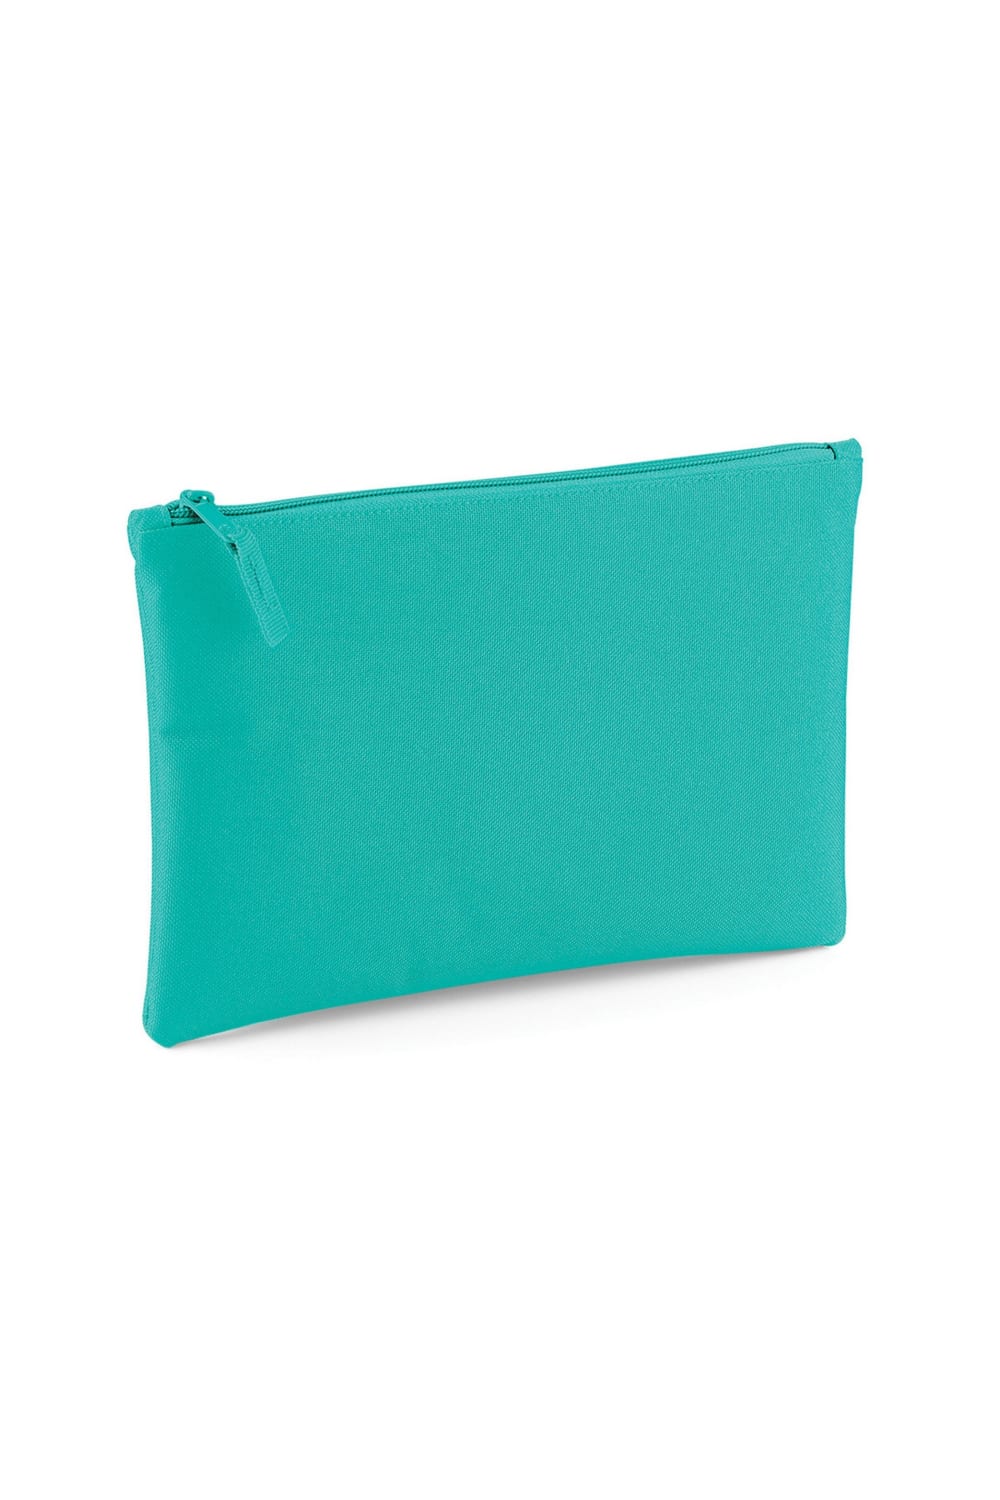 Bagbase Grab Zip Pocket Pouch Bag (Pack of 2) (Mint)